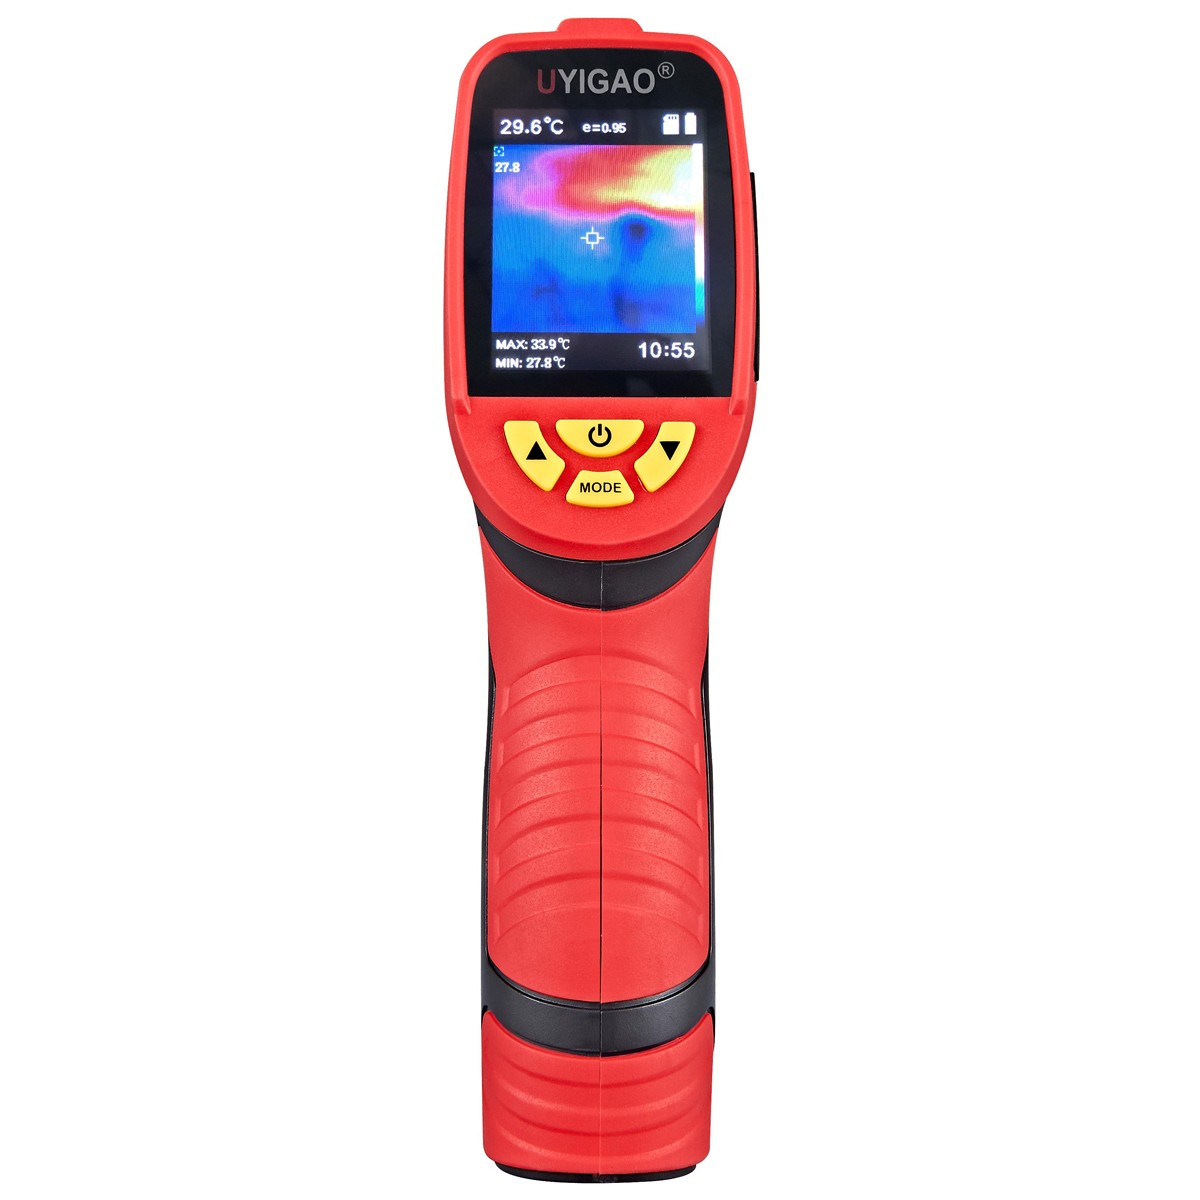 UA99A thermal camera with PC USB interface